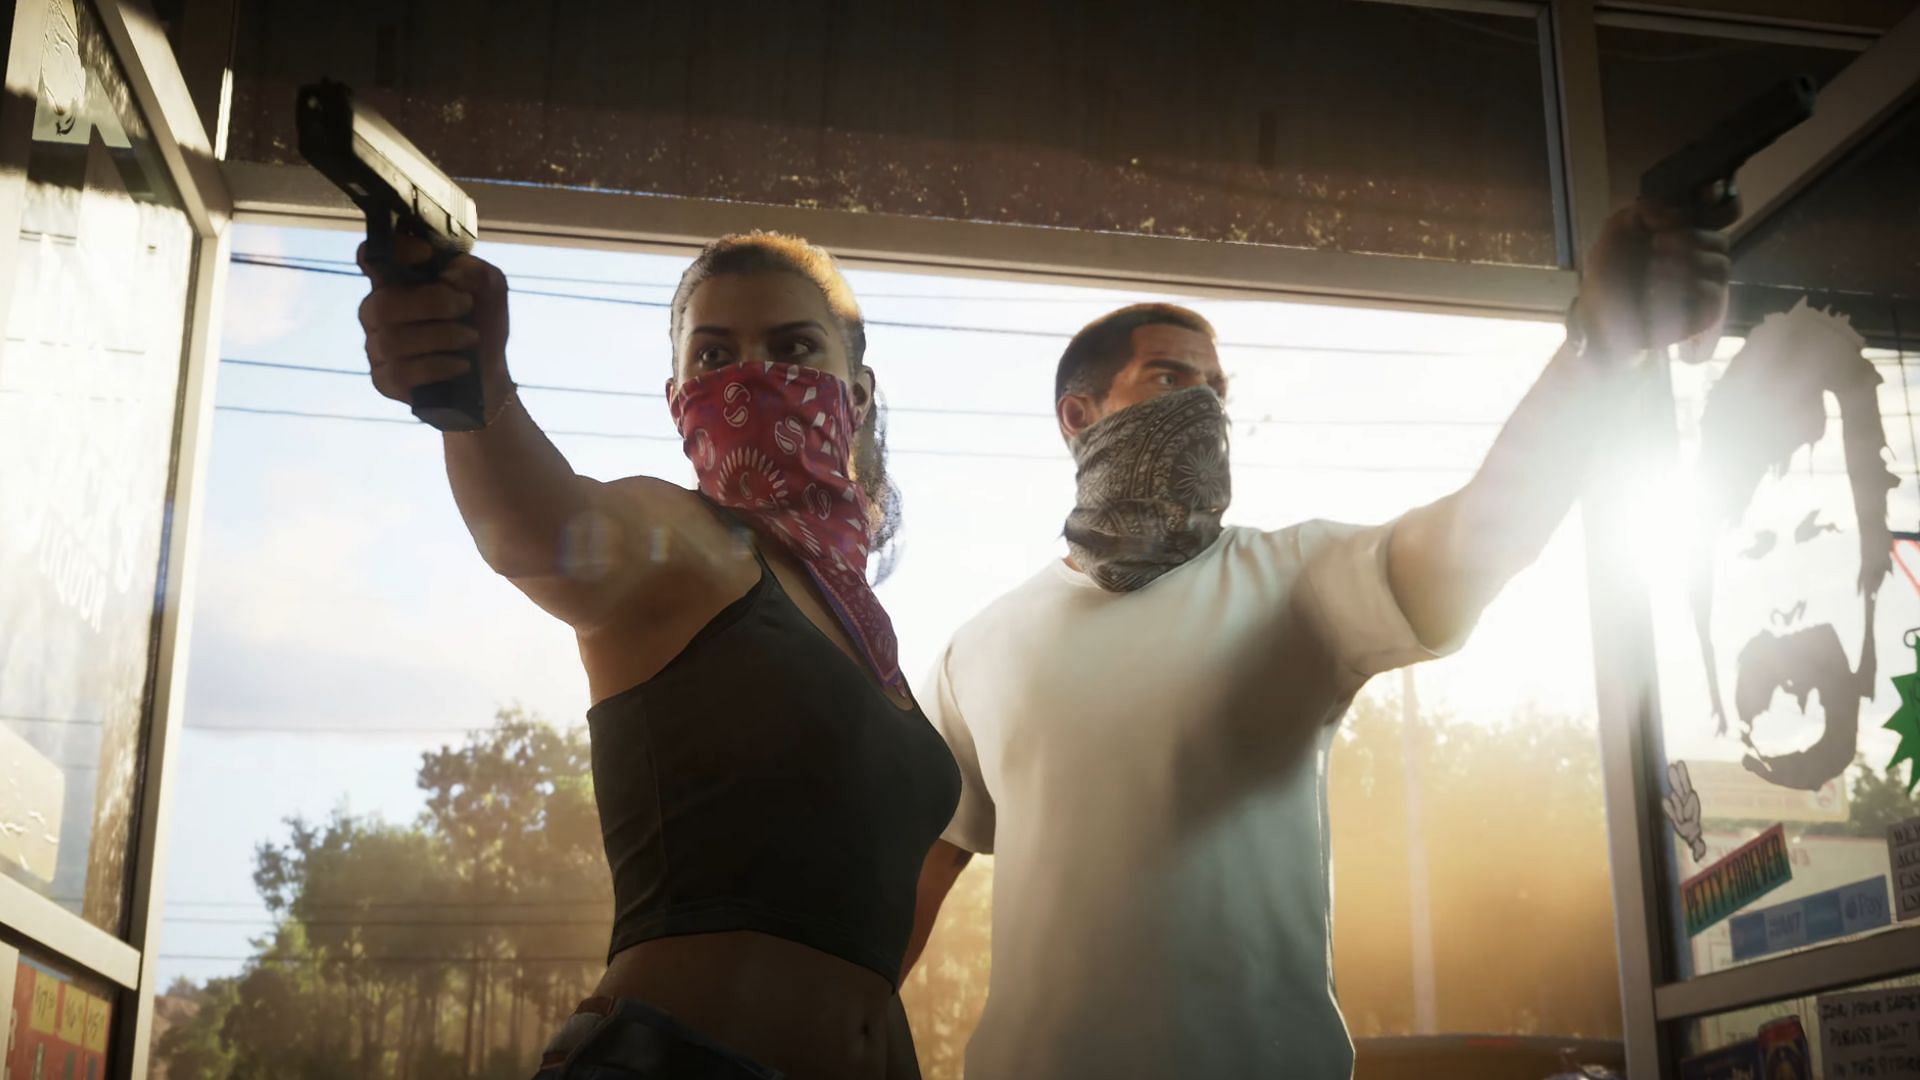 Jason and Lucia were seen dominating a store at gunpoint in the first trailer. (Image via Rockstar Games)